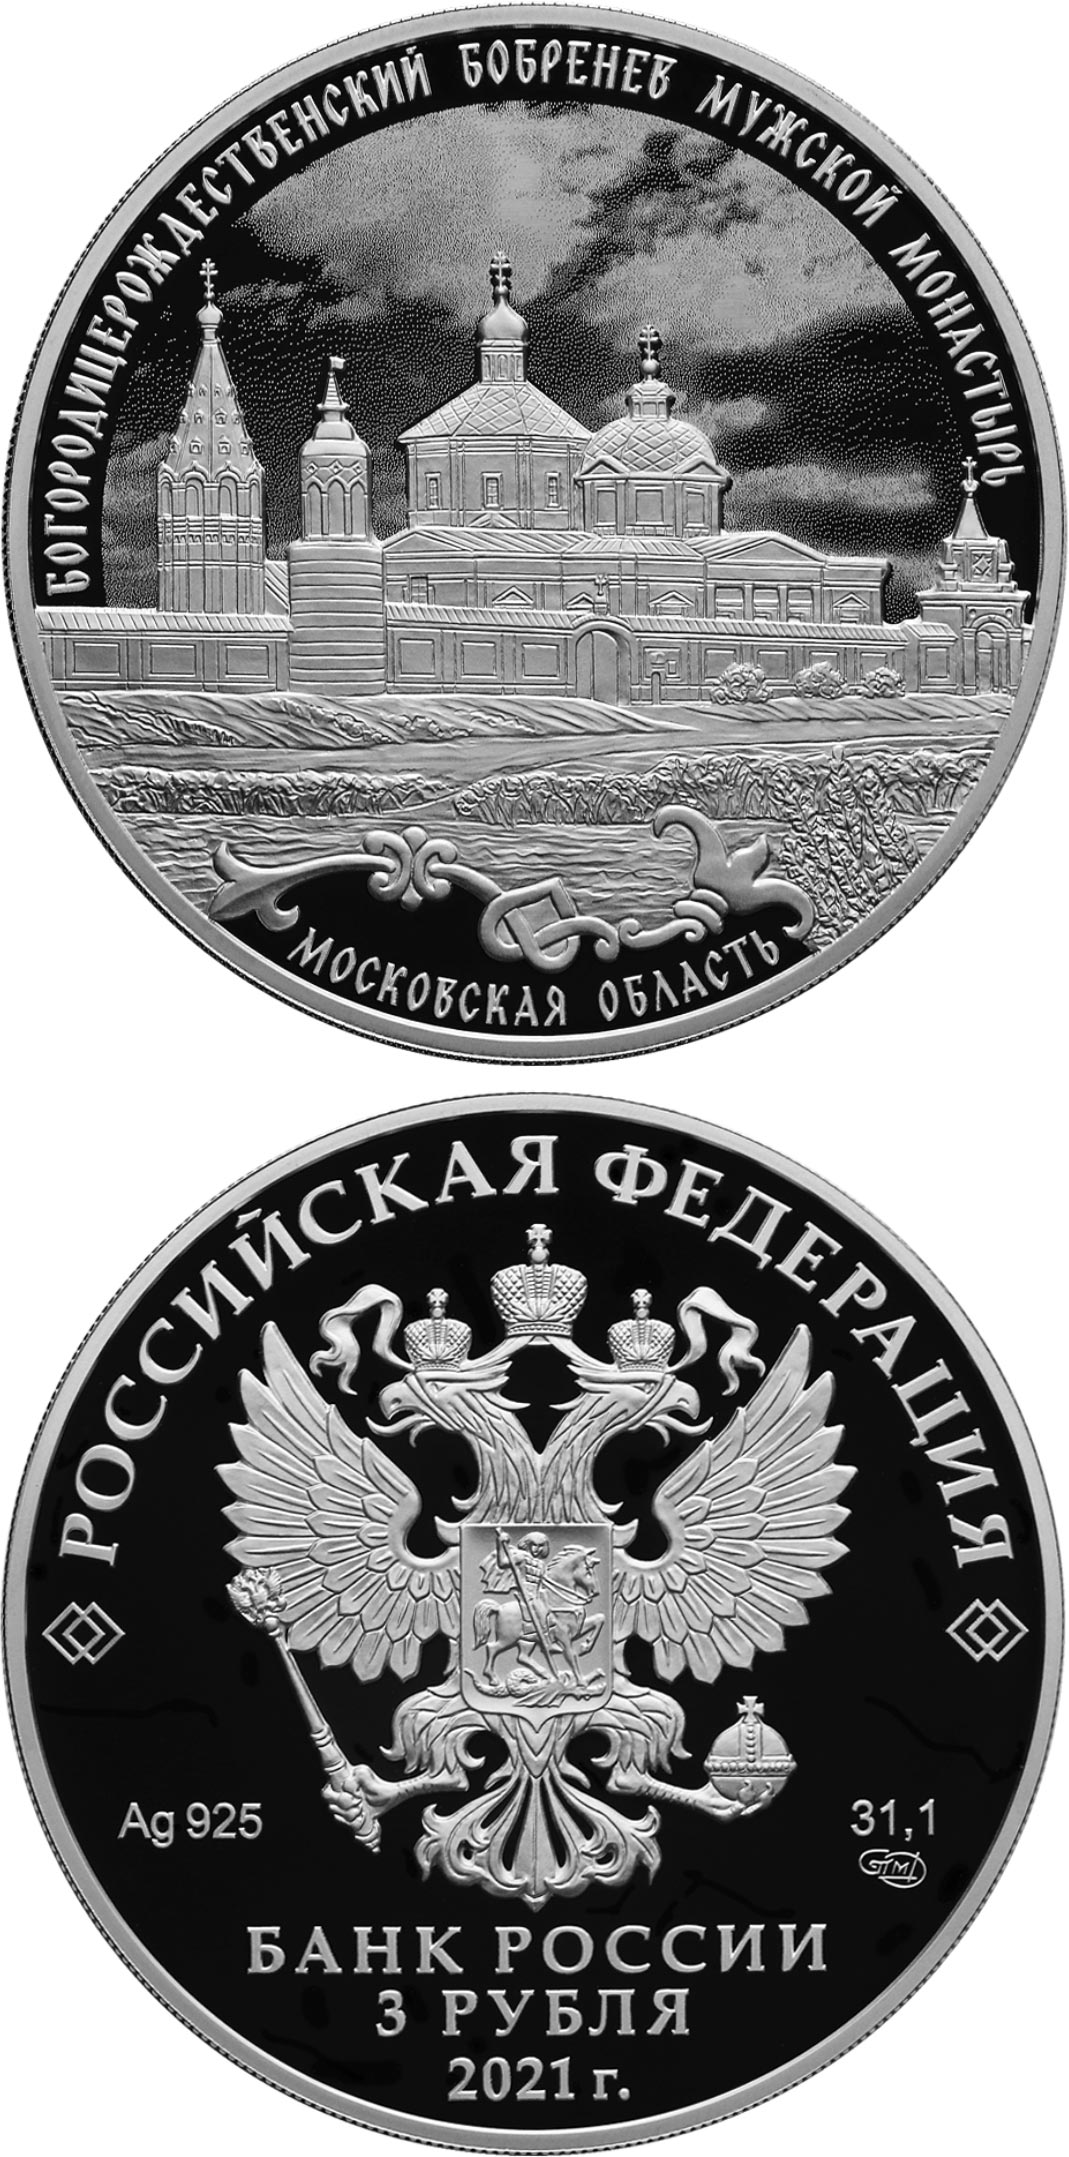 Image of 3 rubles coin - Nativity of the Virgin Bobrenev Monastery | Russia 2021.  The Silver coin is of Proof quality.